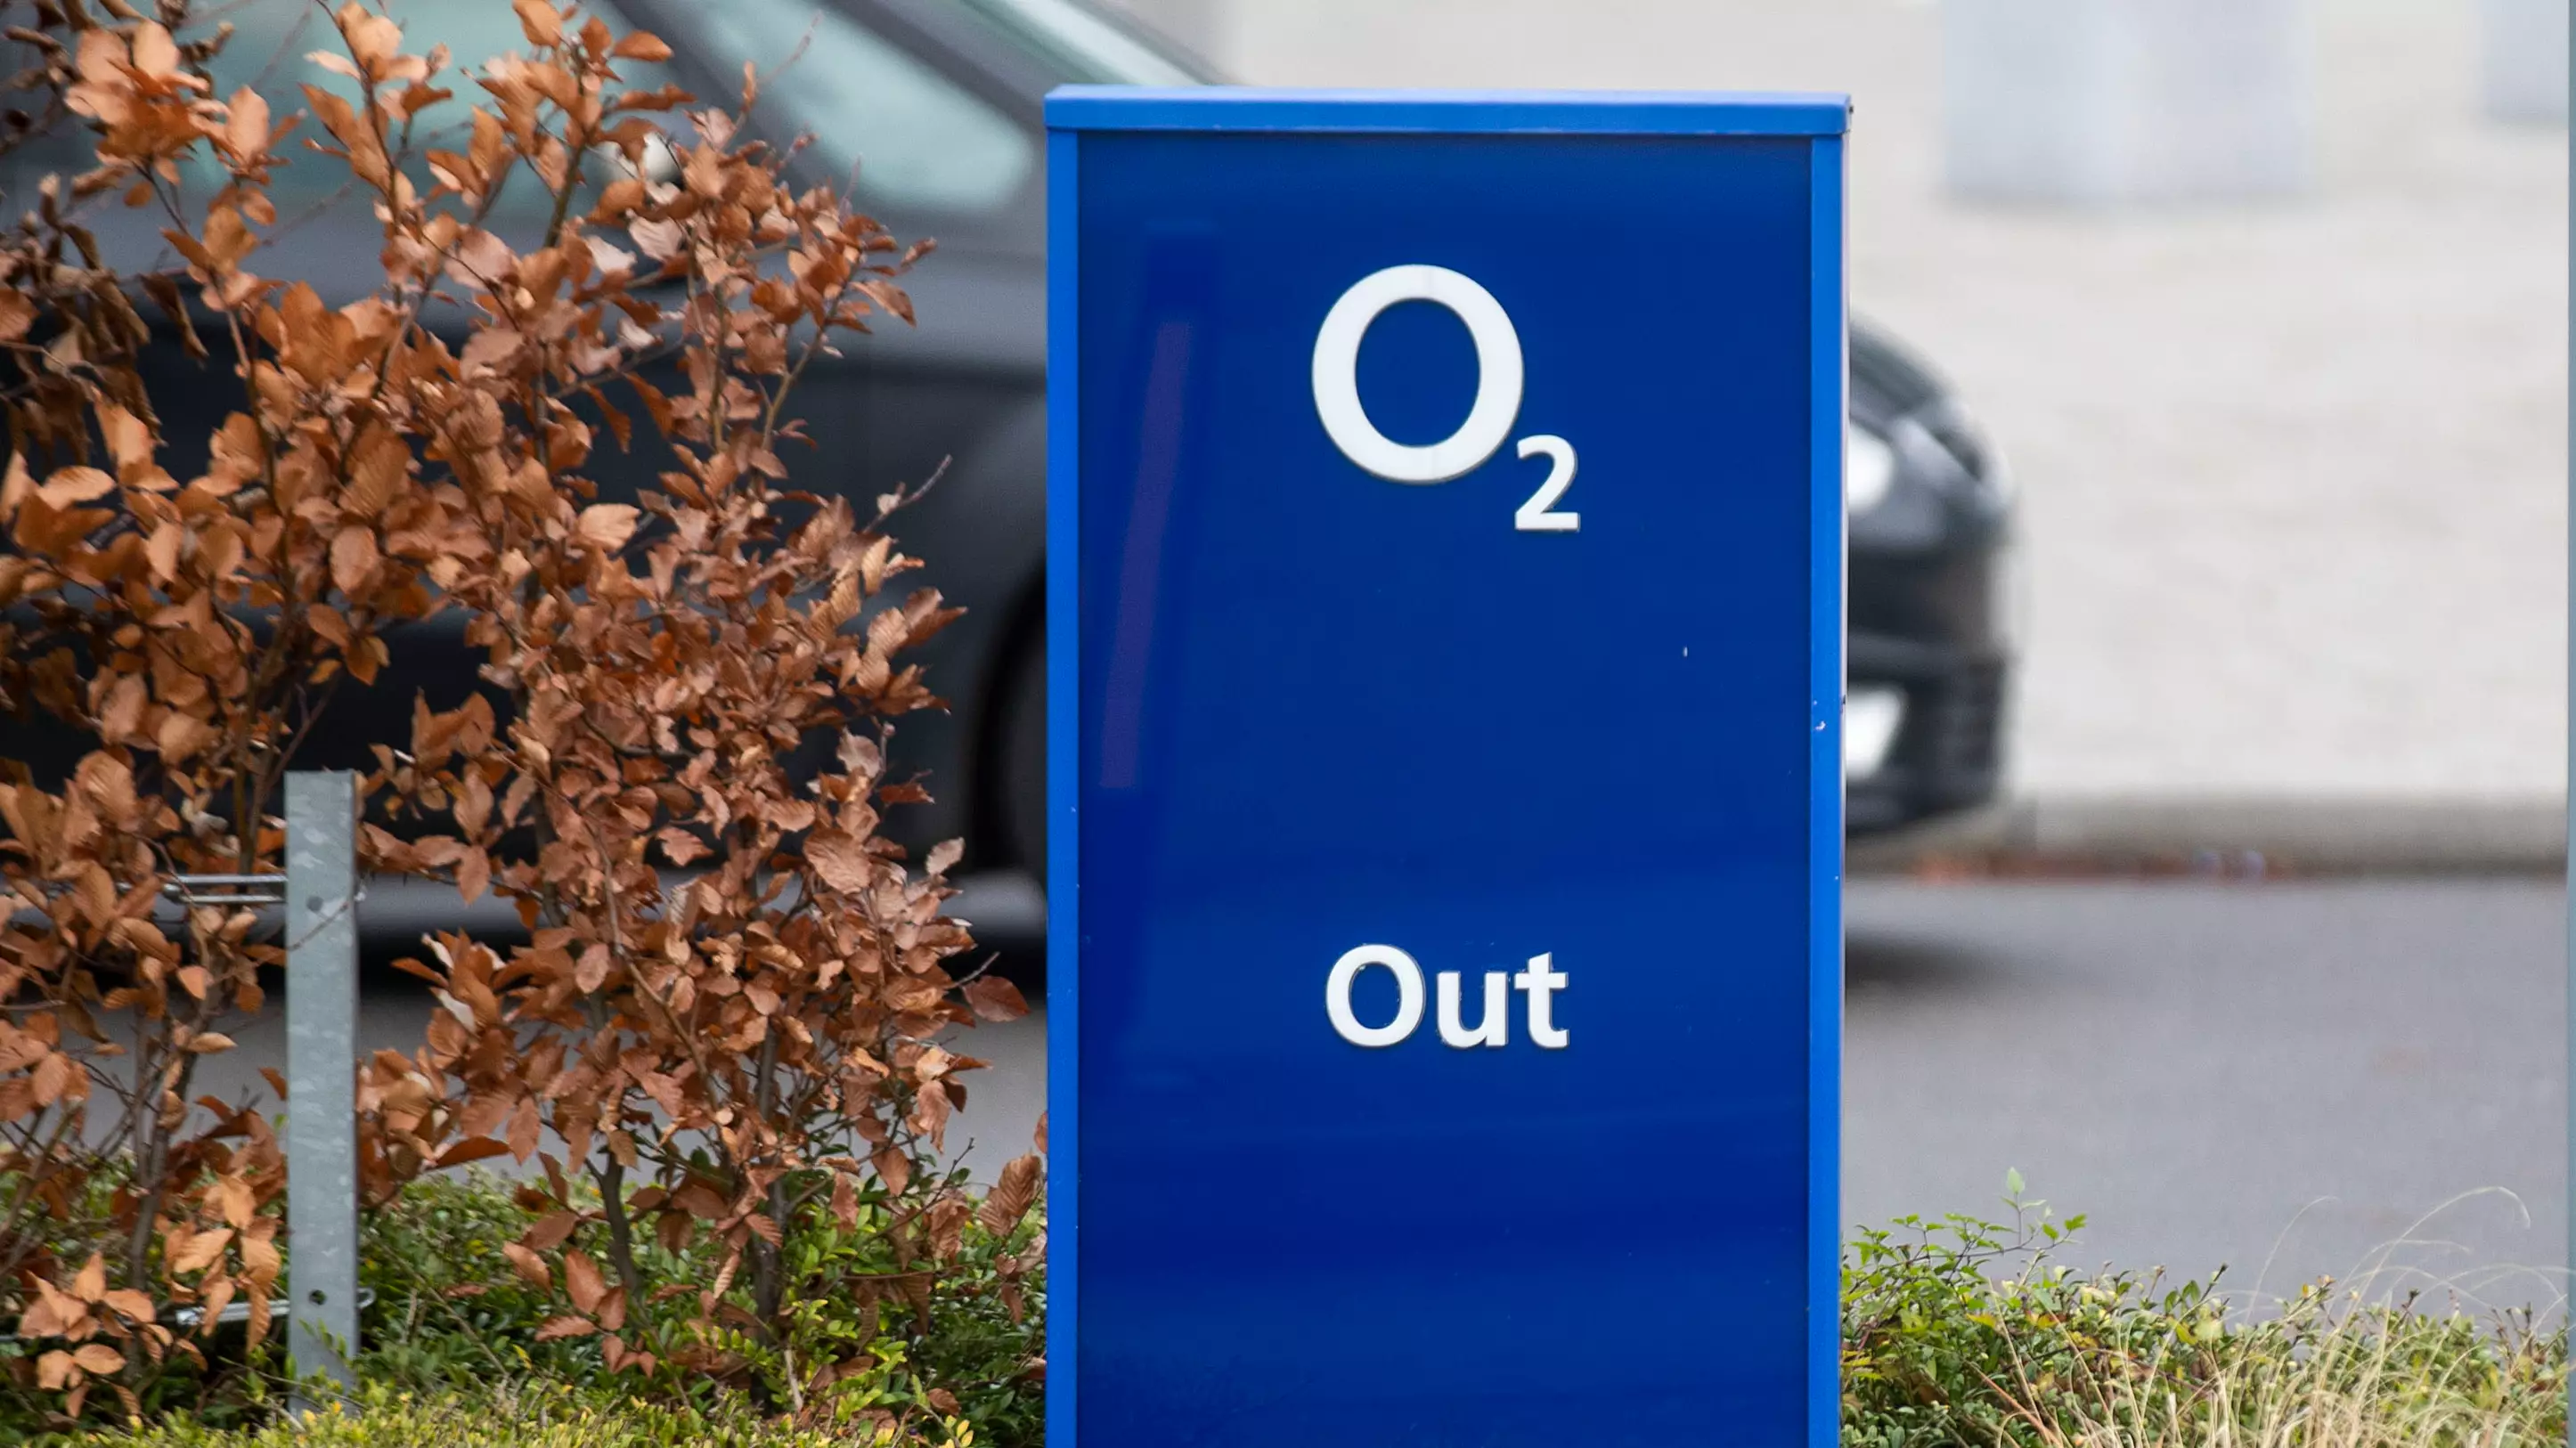 O2 Customers Complain They Still Don't Have 4G But Company Says Problem Is Fixed.